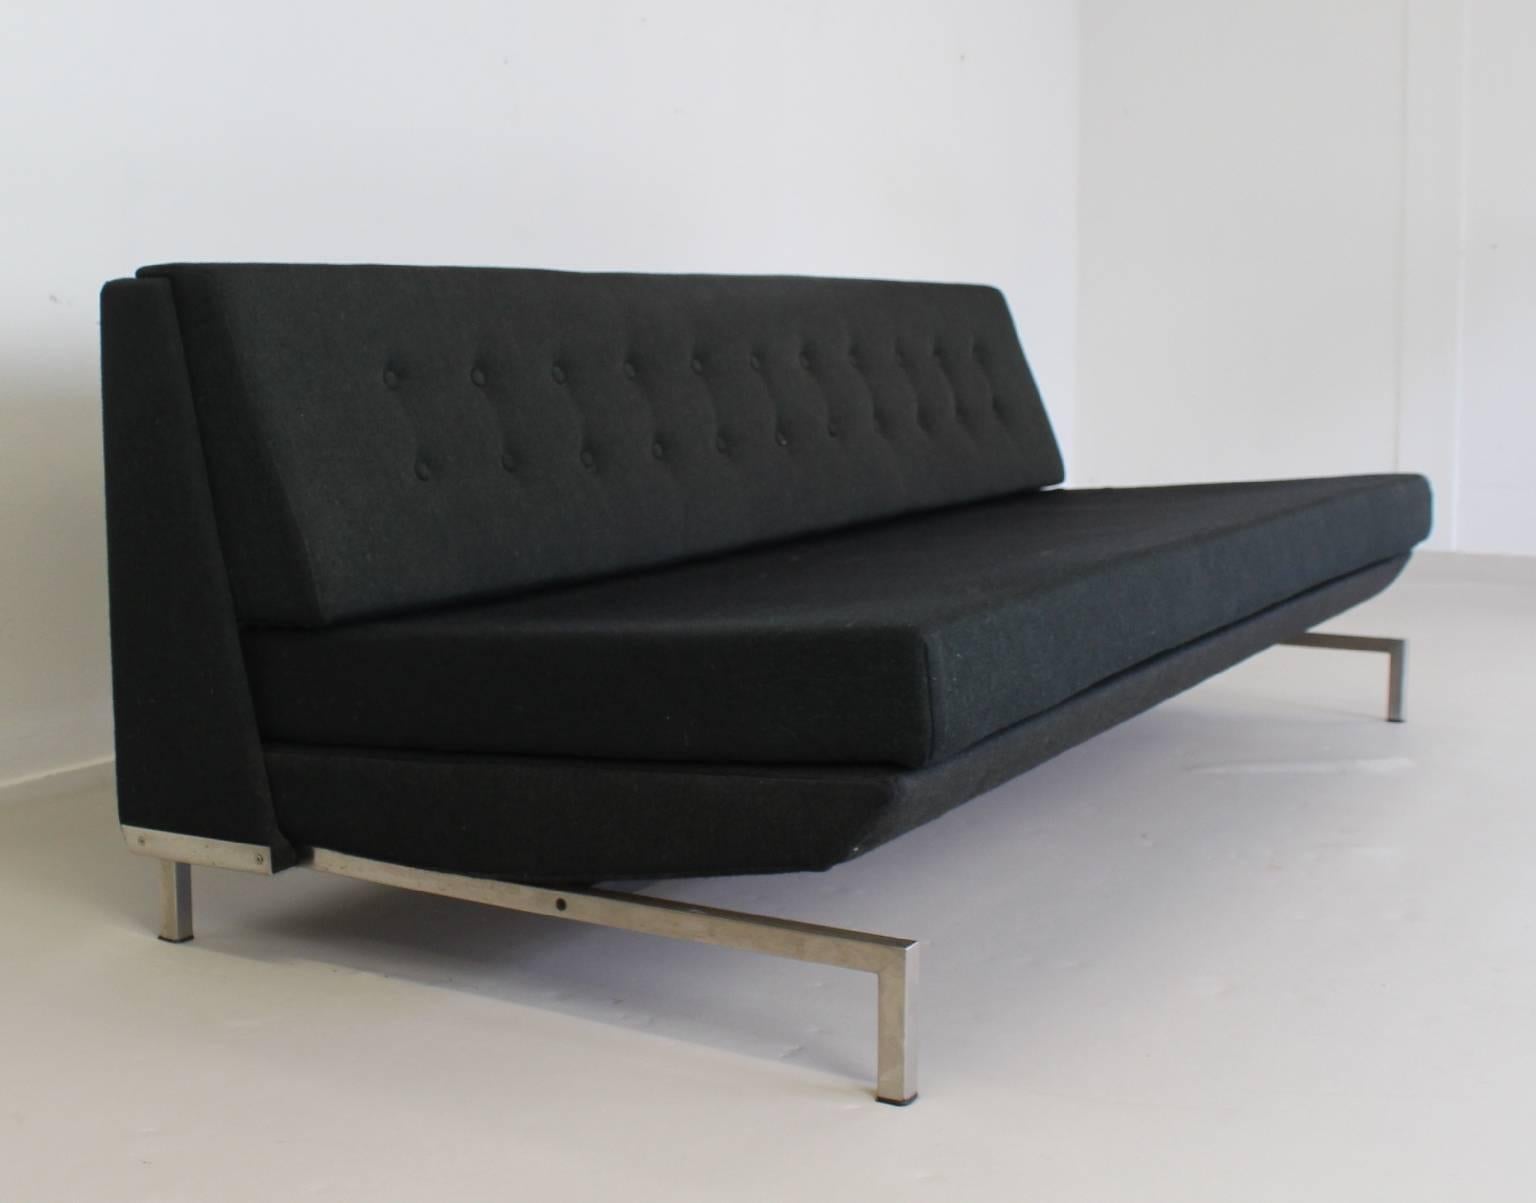 Belgian Design Sit Sleeping Couch for Beaufort In Excellent Condition For Sale In Staphorst, NL